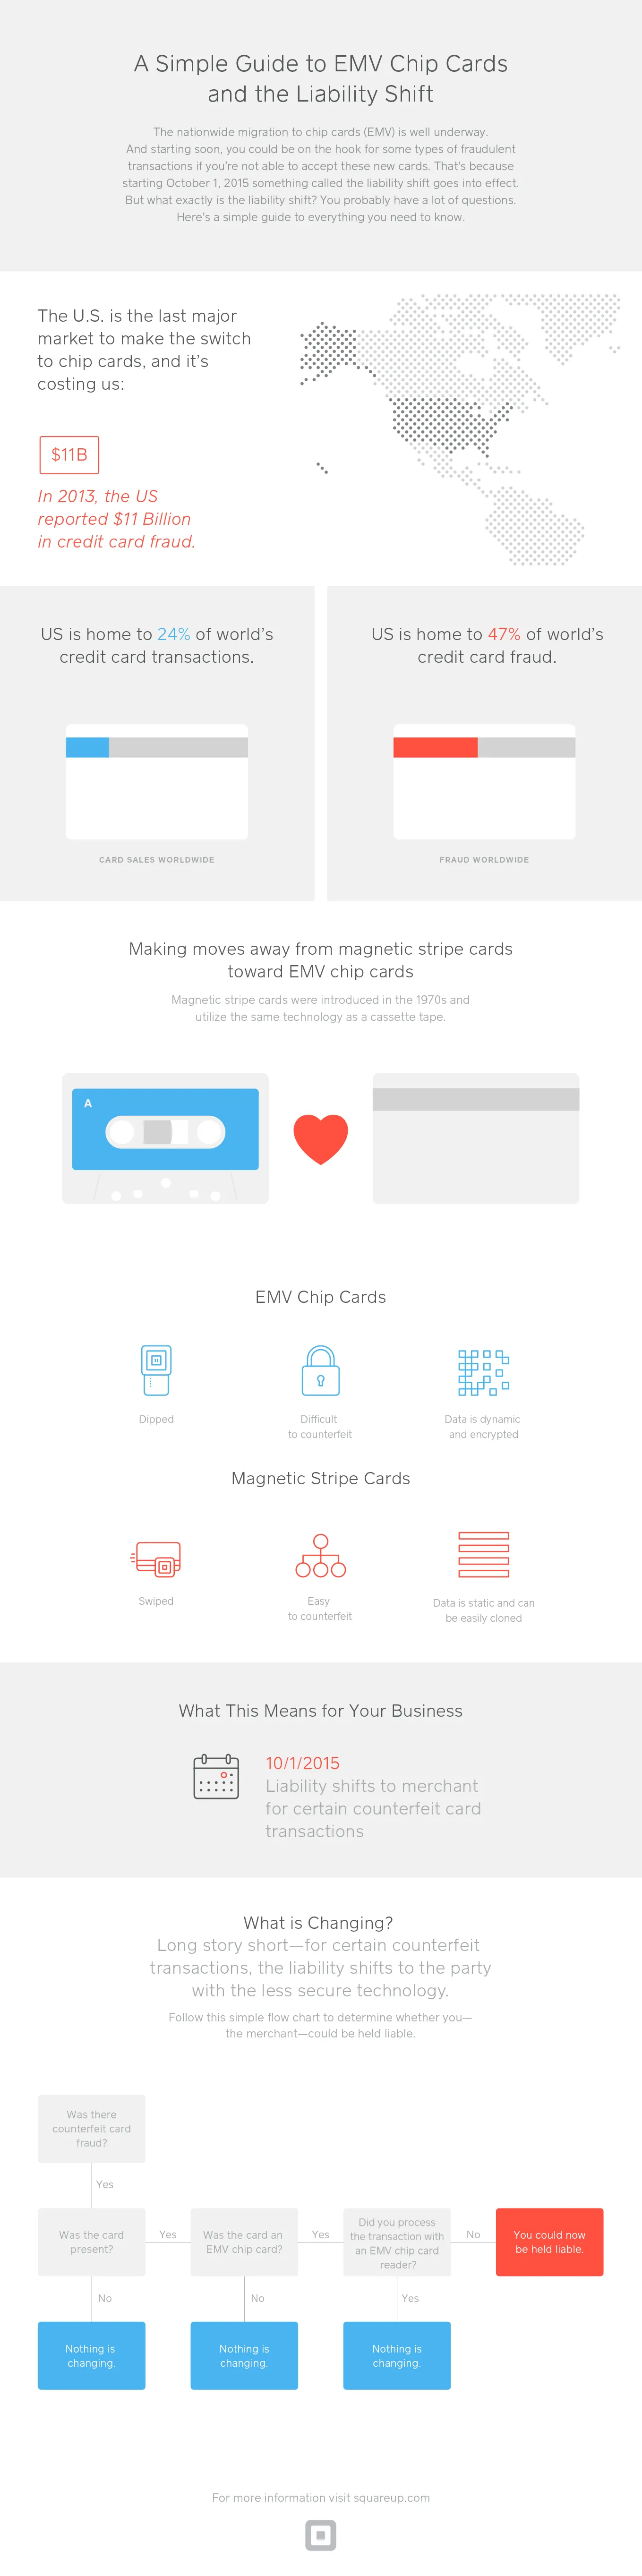 What Is the EMV Liability Shift?, How Does EMV Work